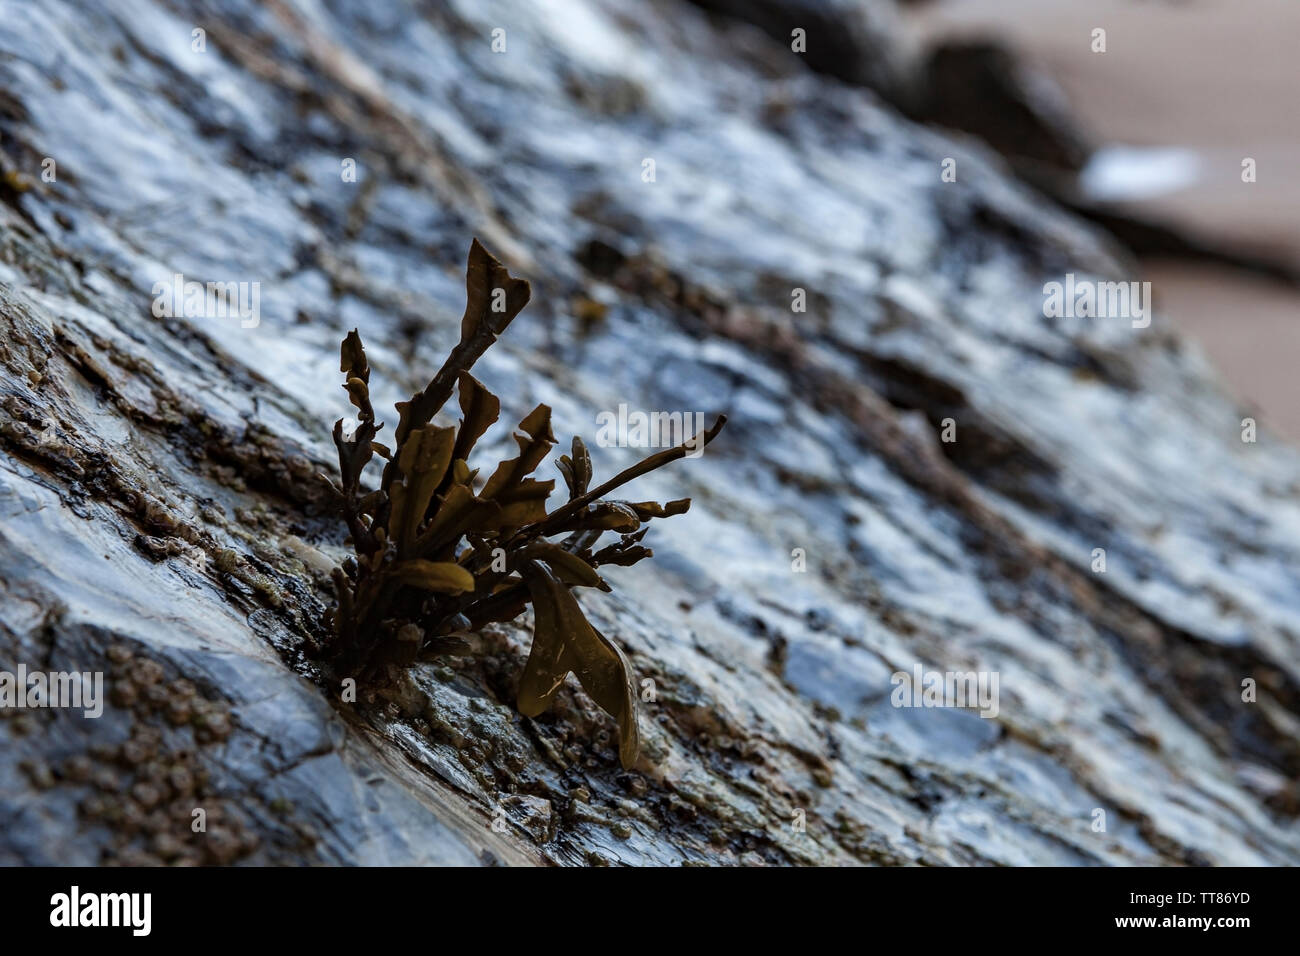 Algae 'fucus' on a sloping rock that low tide left uncovered. Can be used as background. Stock Photo